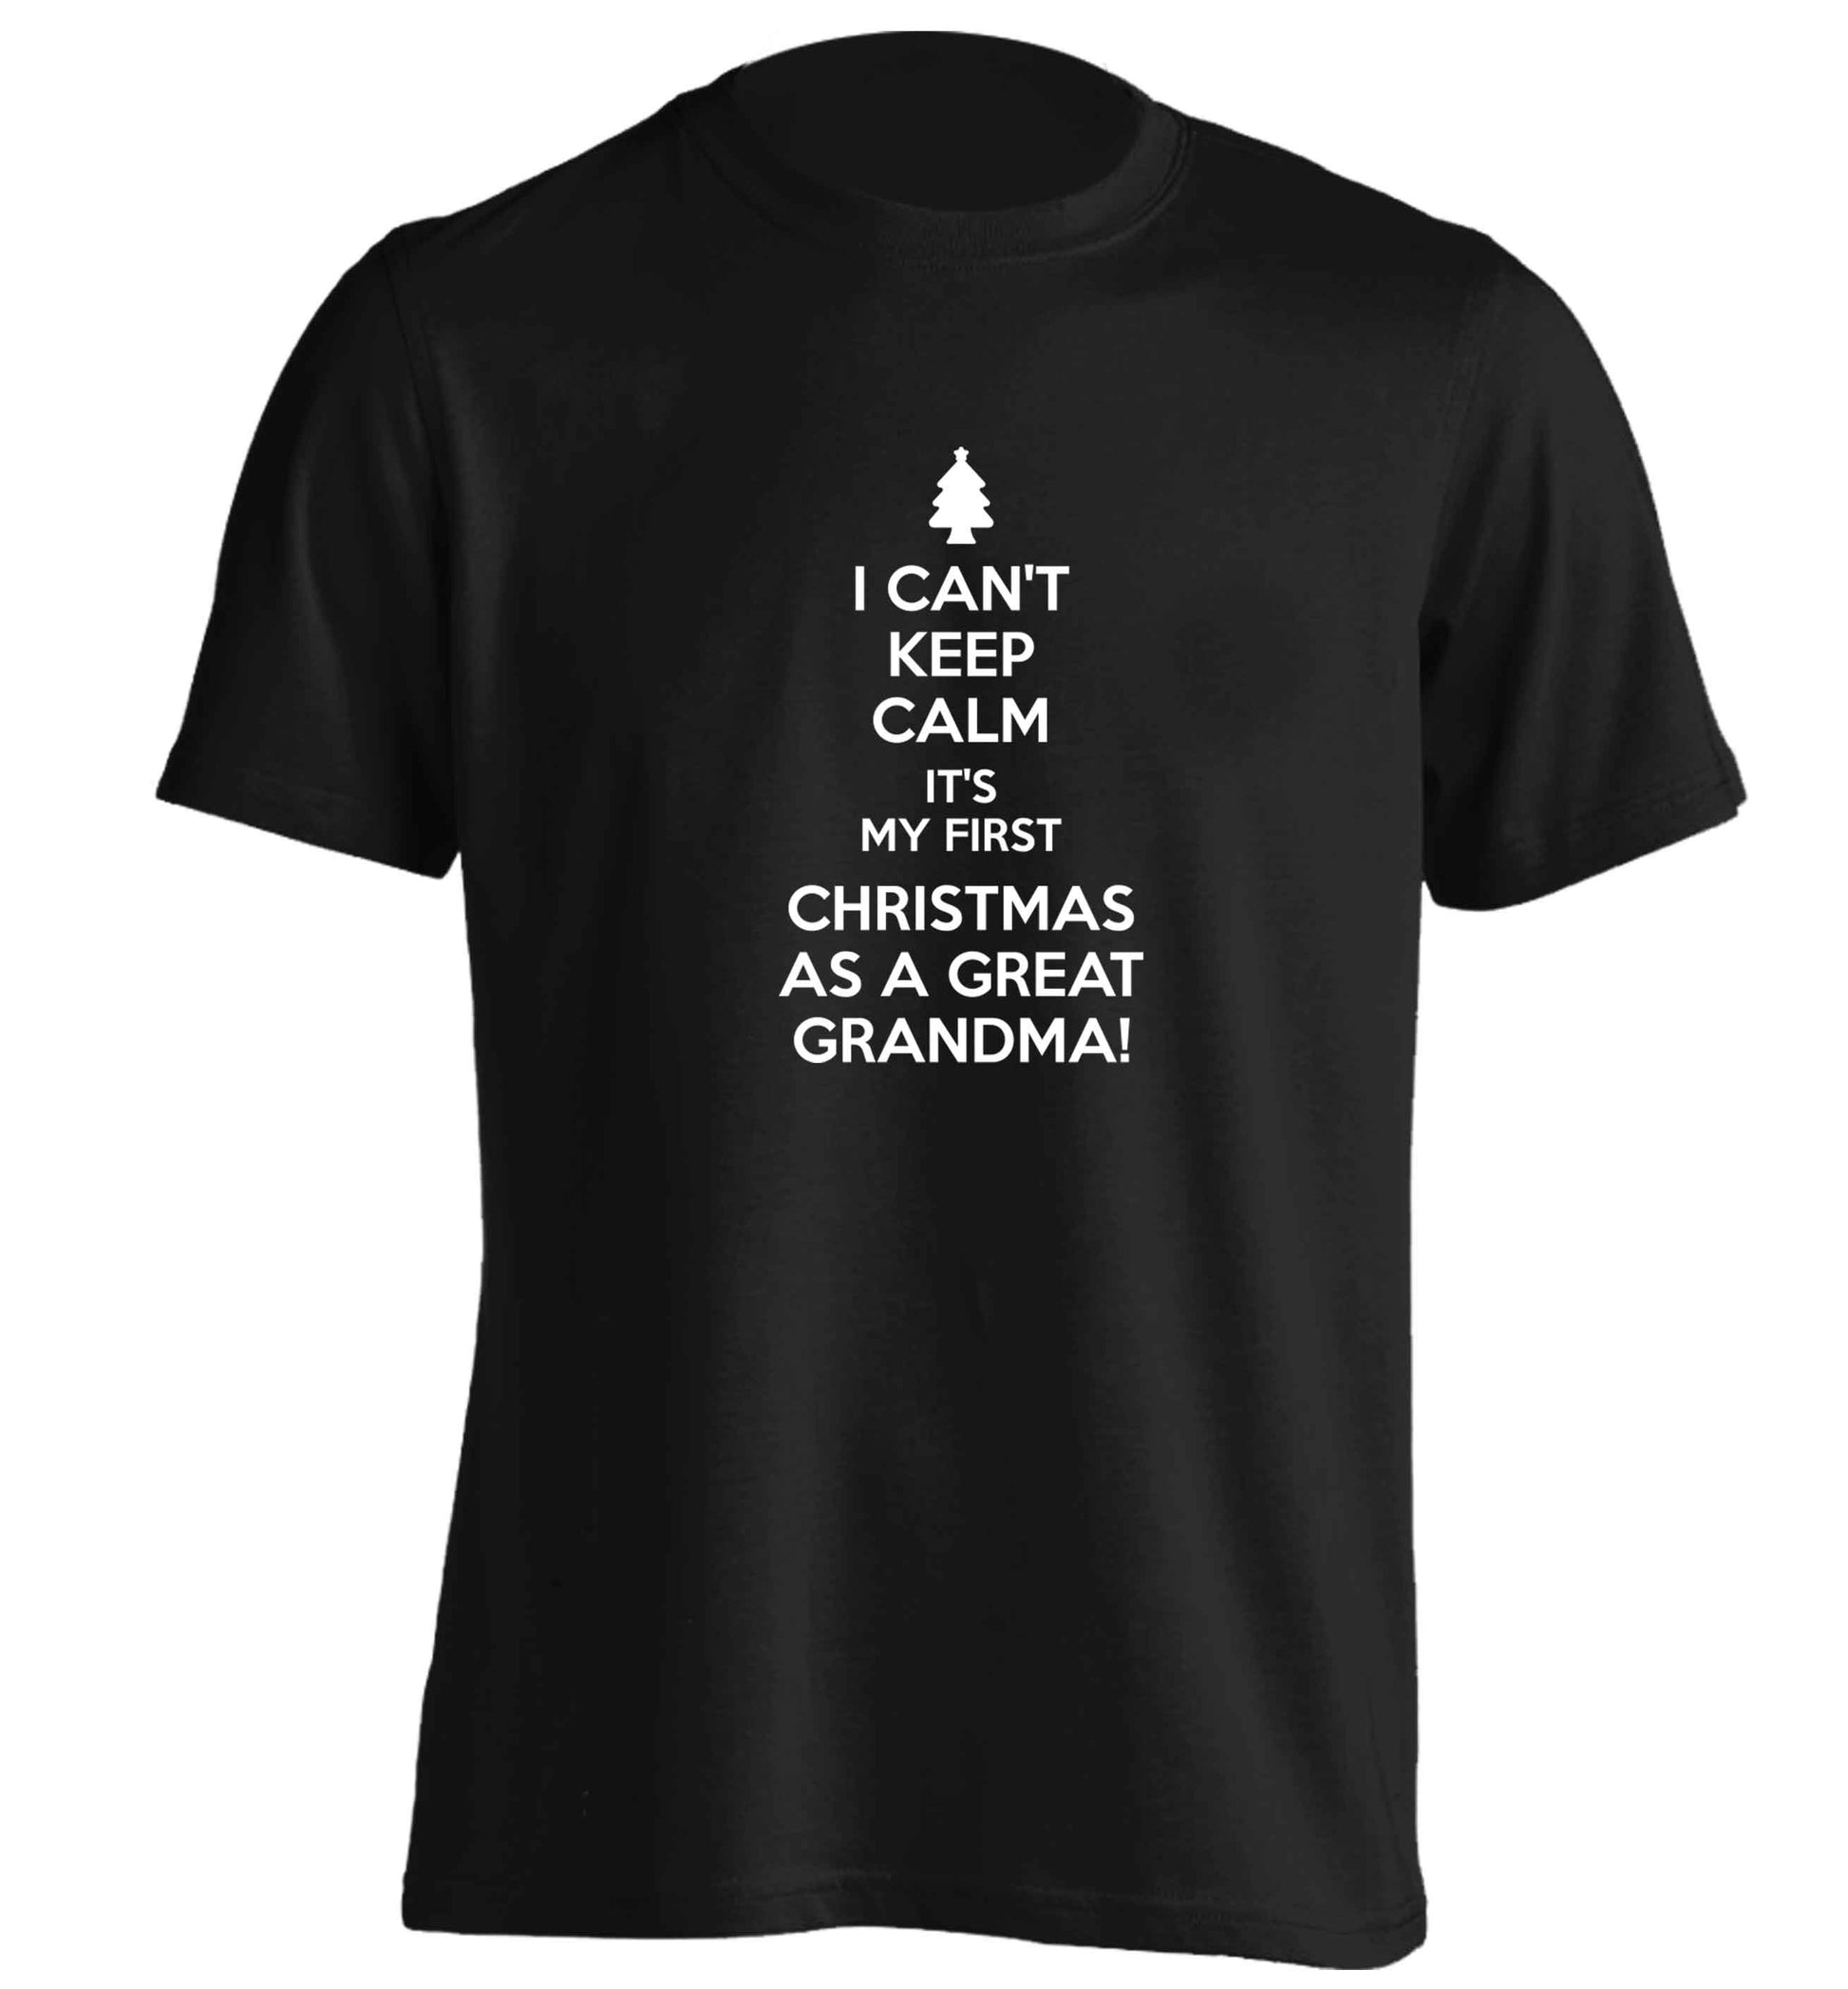 I can't keep calm it's my first Christmas as a great grandma! adults unisex black Tshirt 2XL